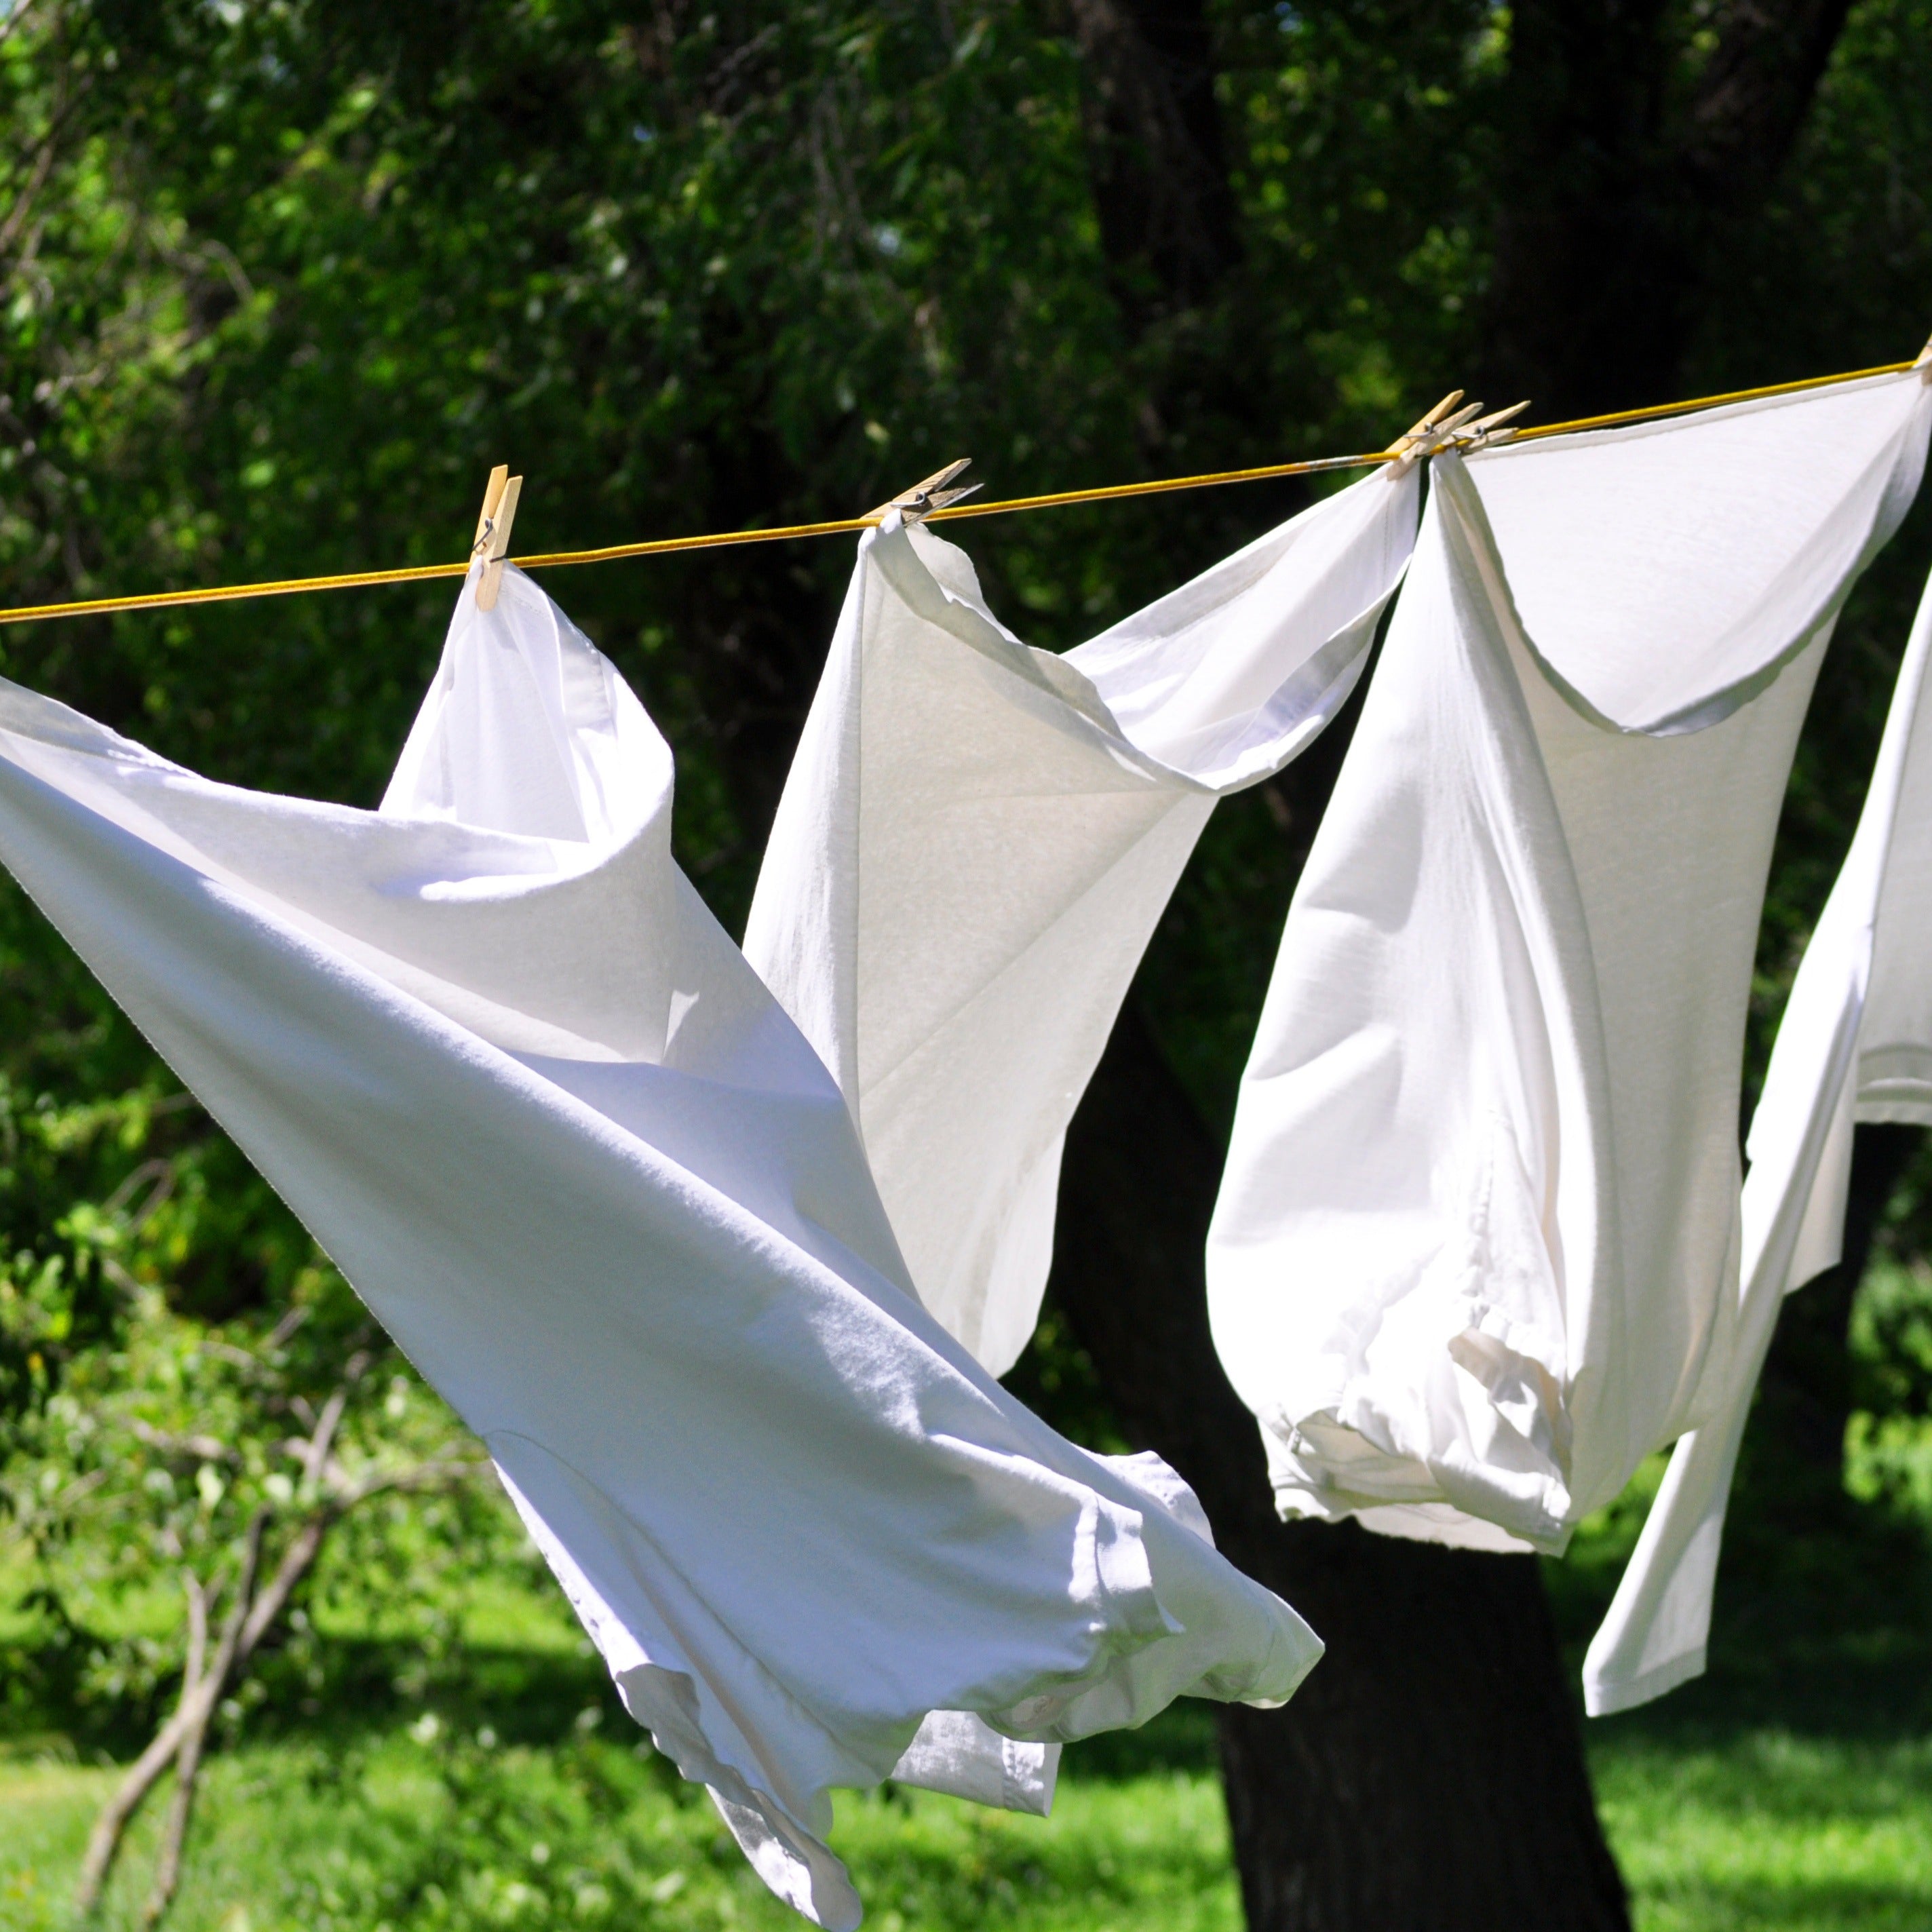 Description: White clothes, infused with the scent of Tuscany Candle®'s Fresh Linen Scented Wax Melt (2.5 oz), hanging on a clothesline.